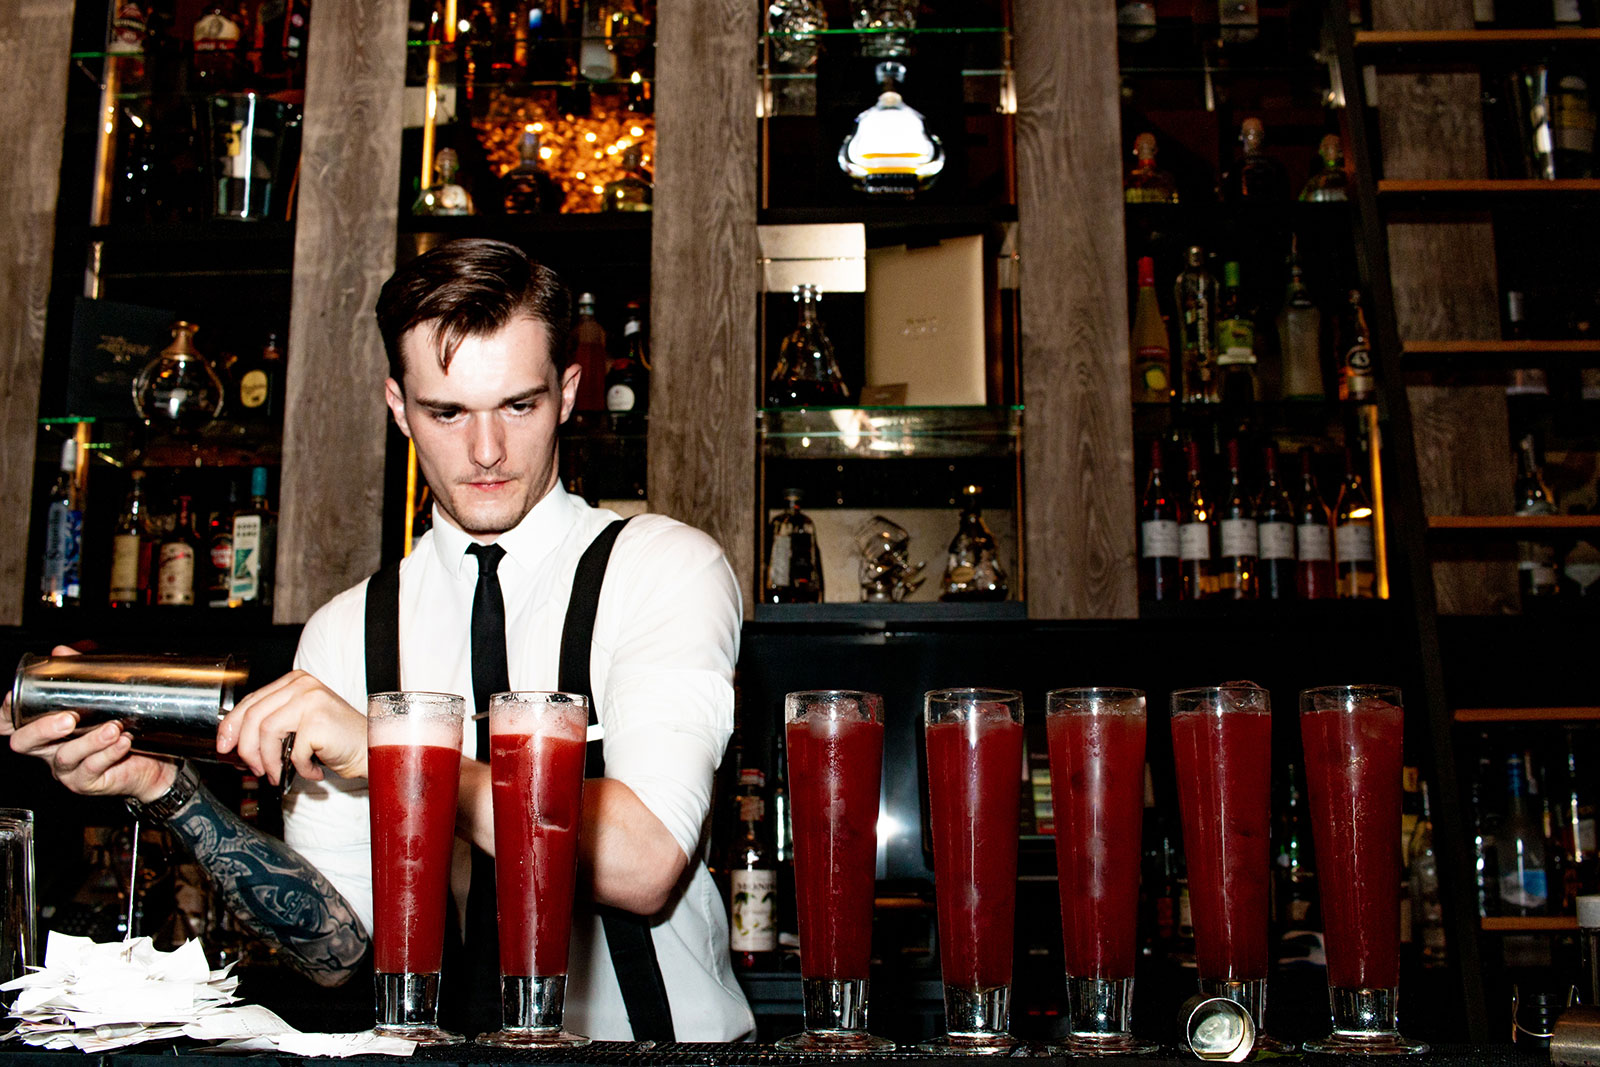 Barman pouring seven red cocktails on bar